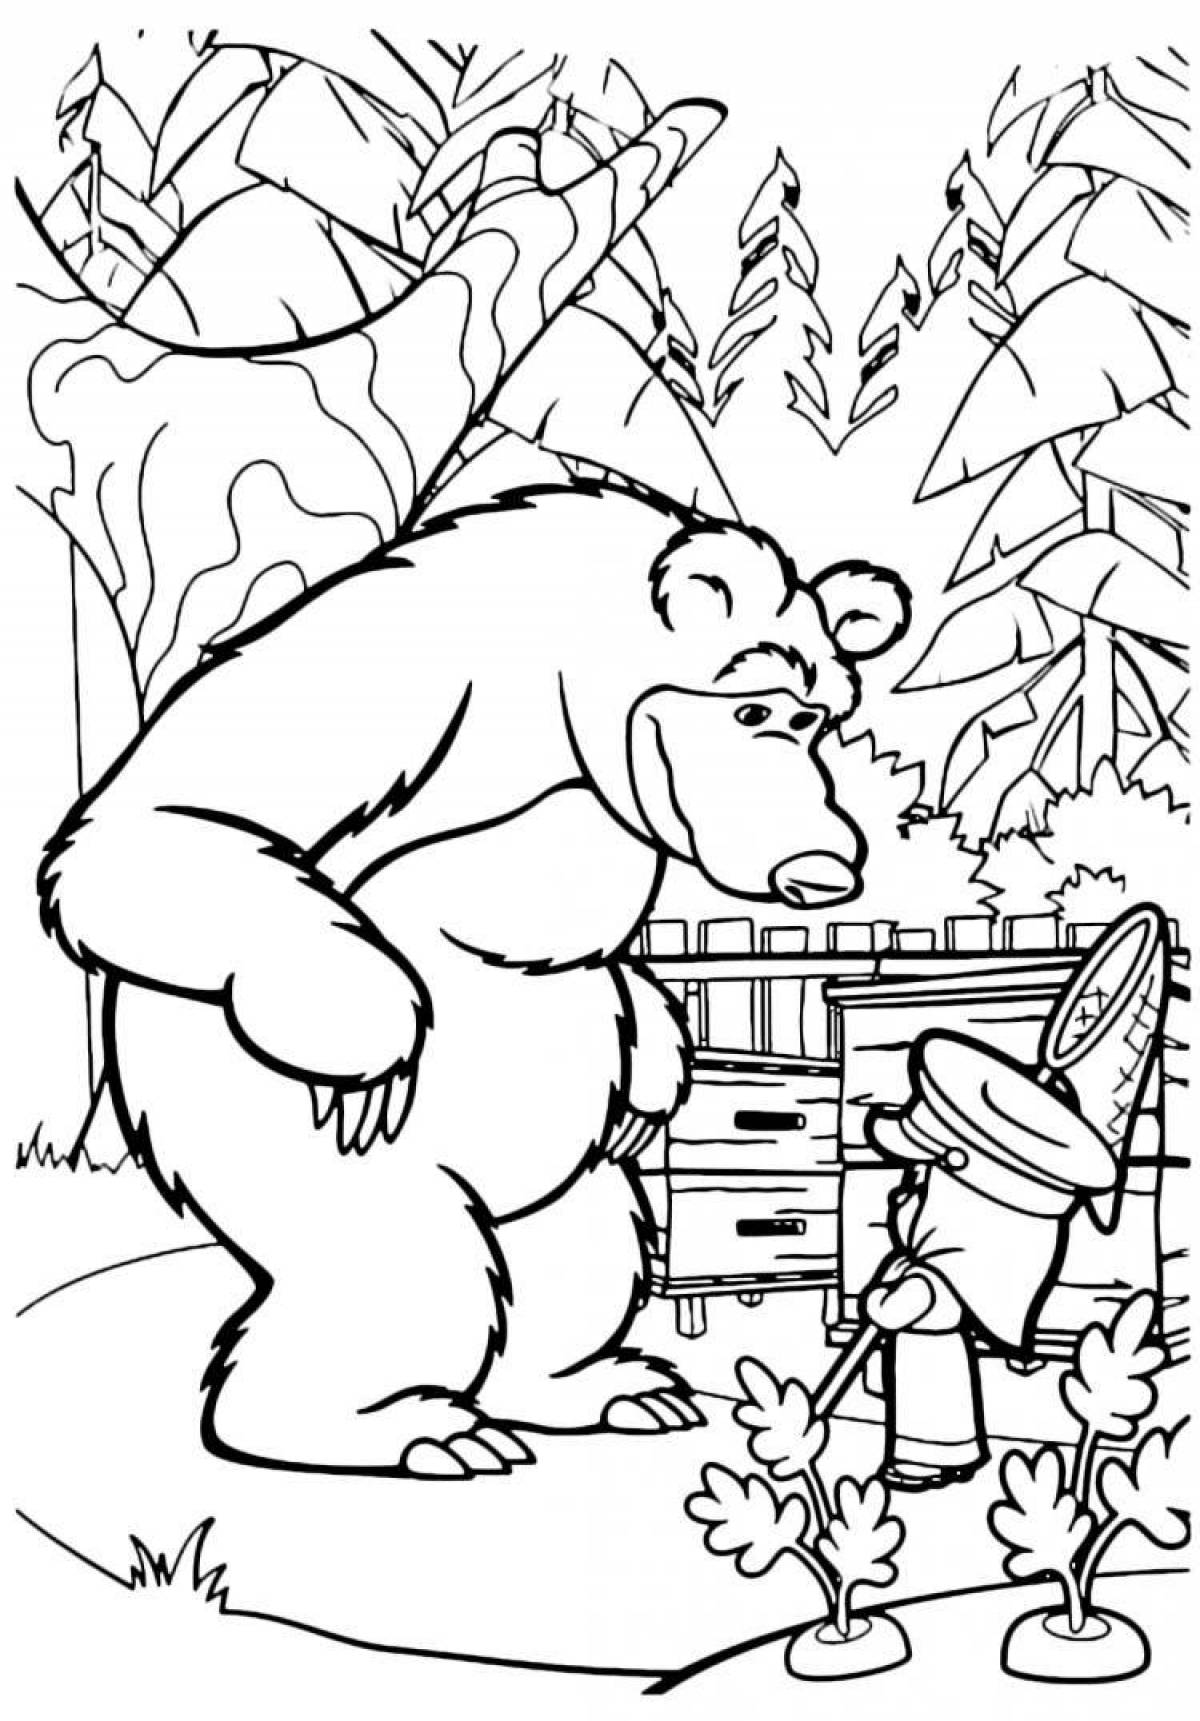 Masha and the bear coloring pages